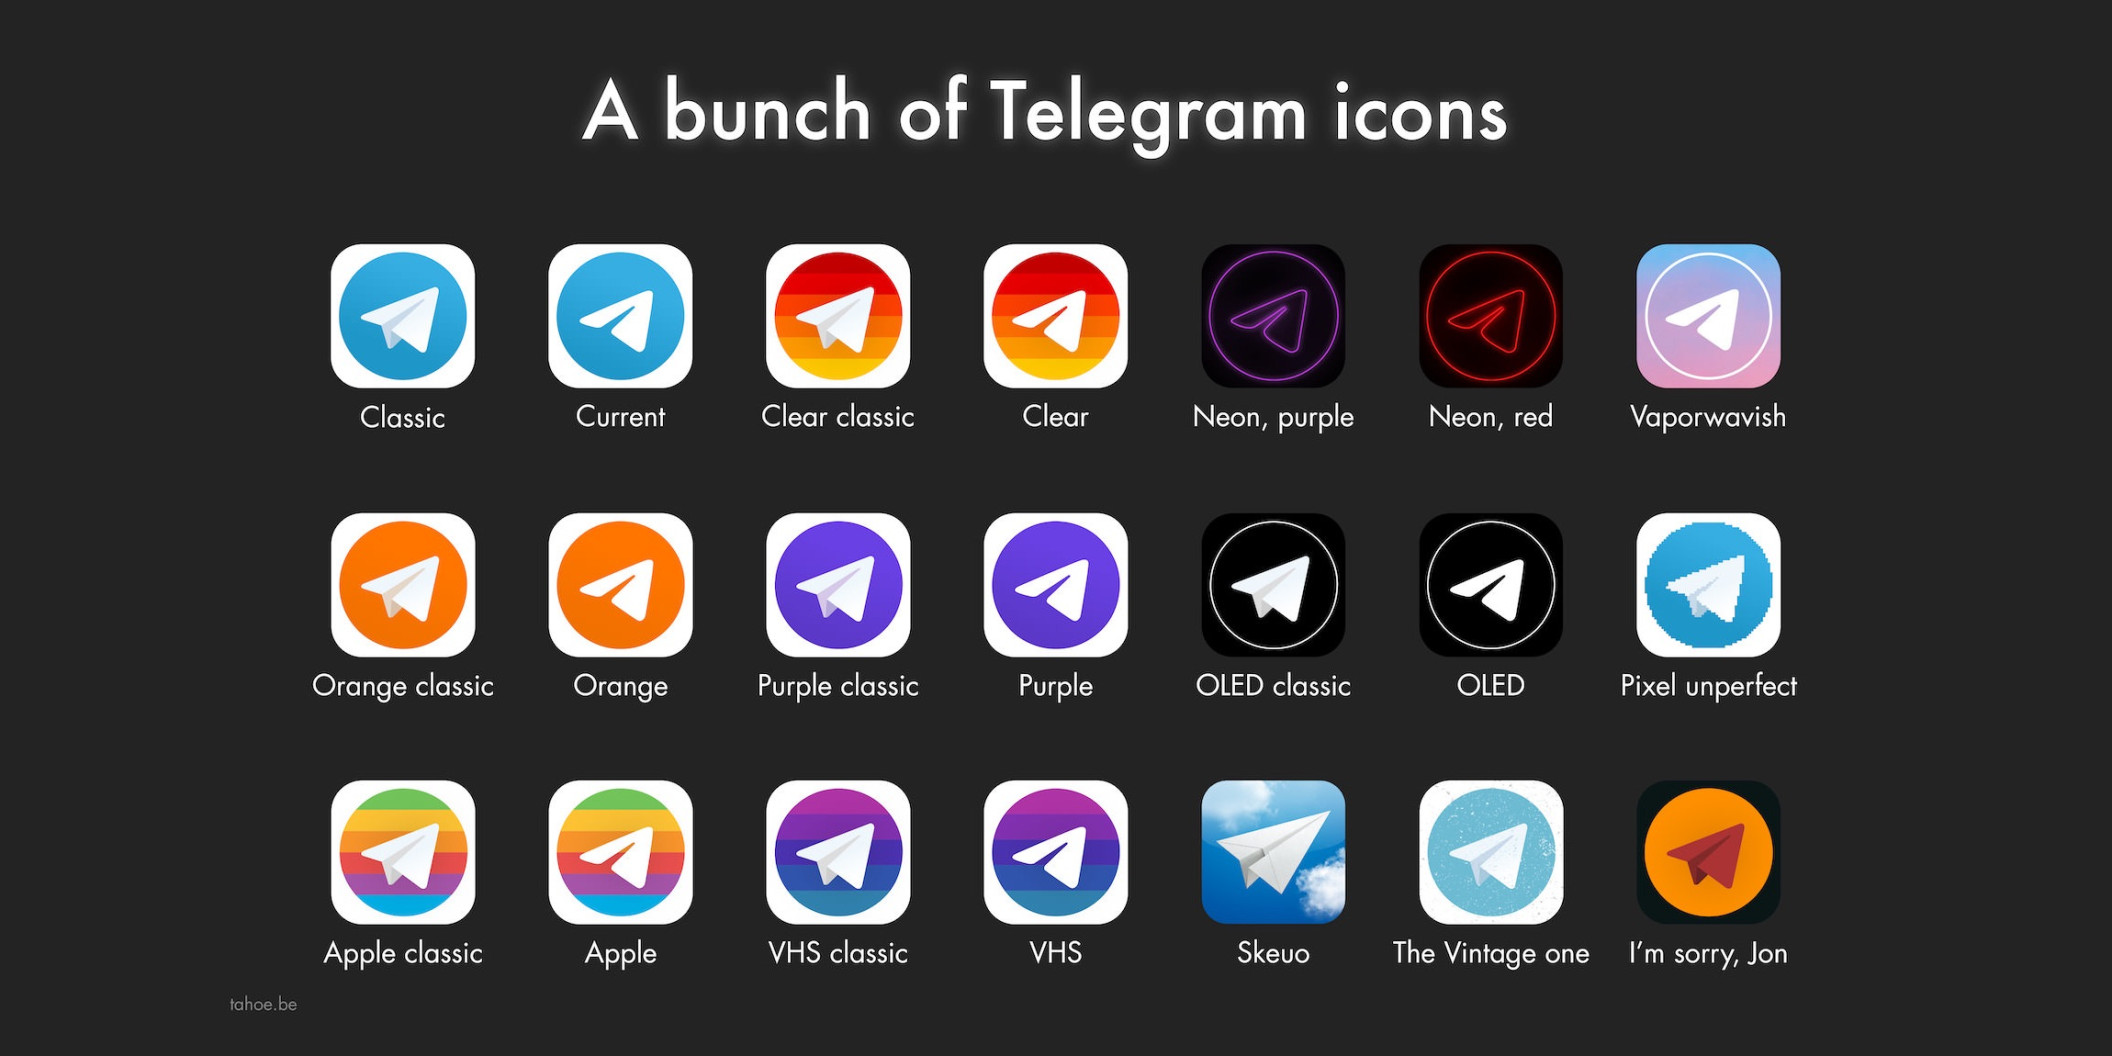 Featured image of the A bunch of Telegram icons post